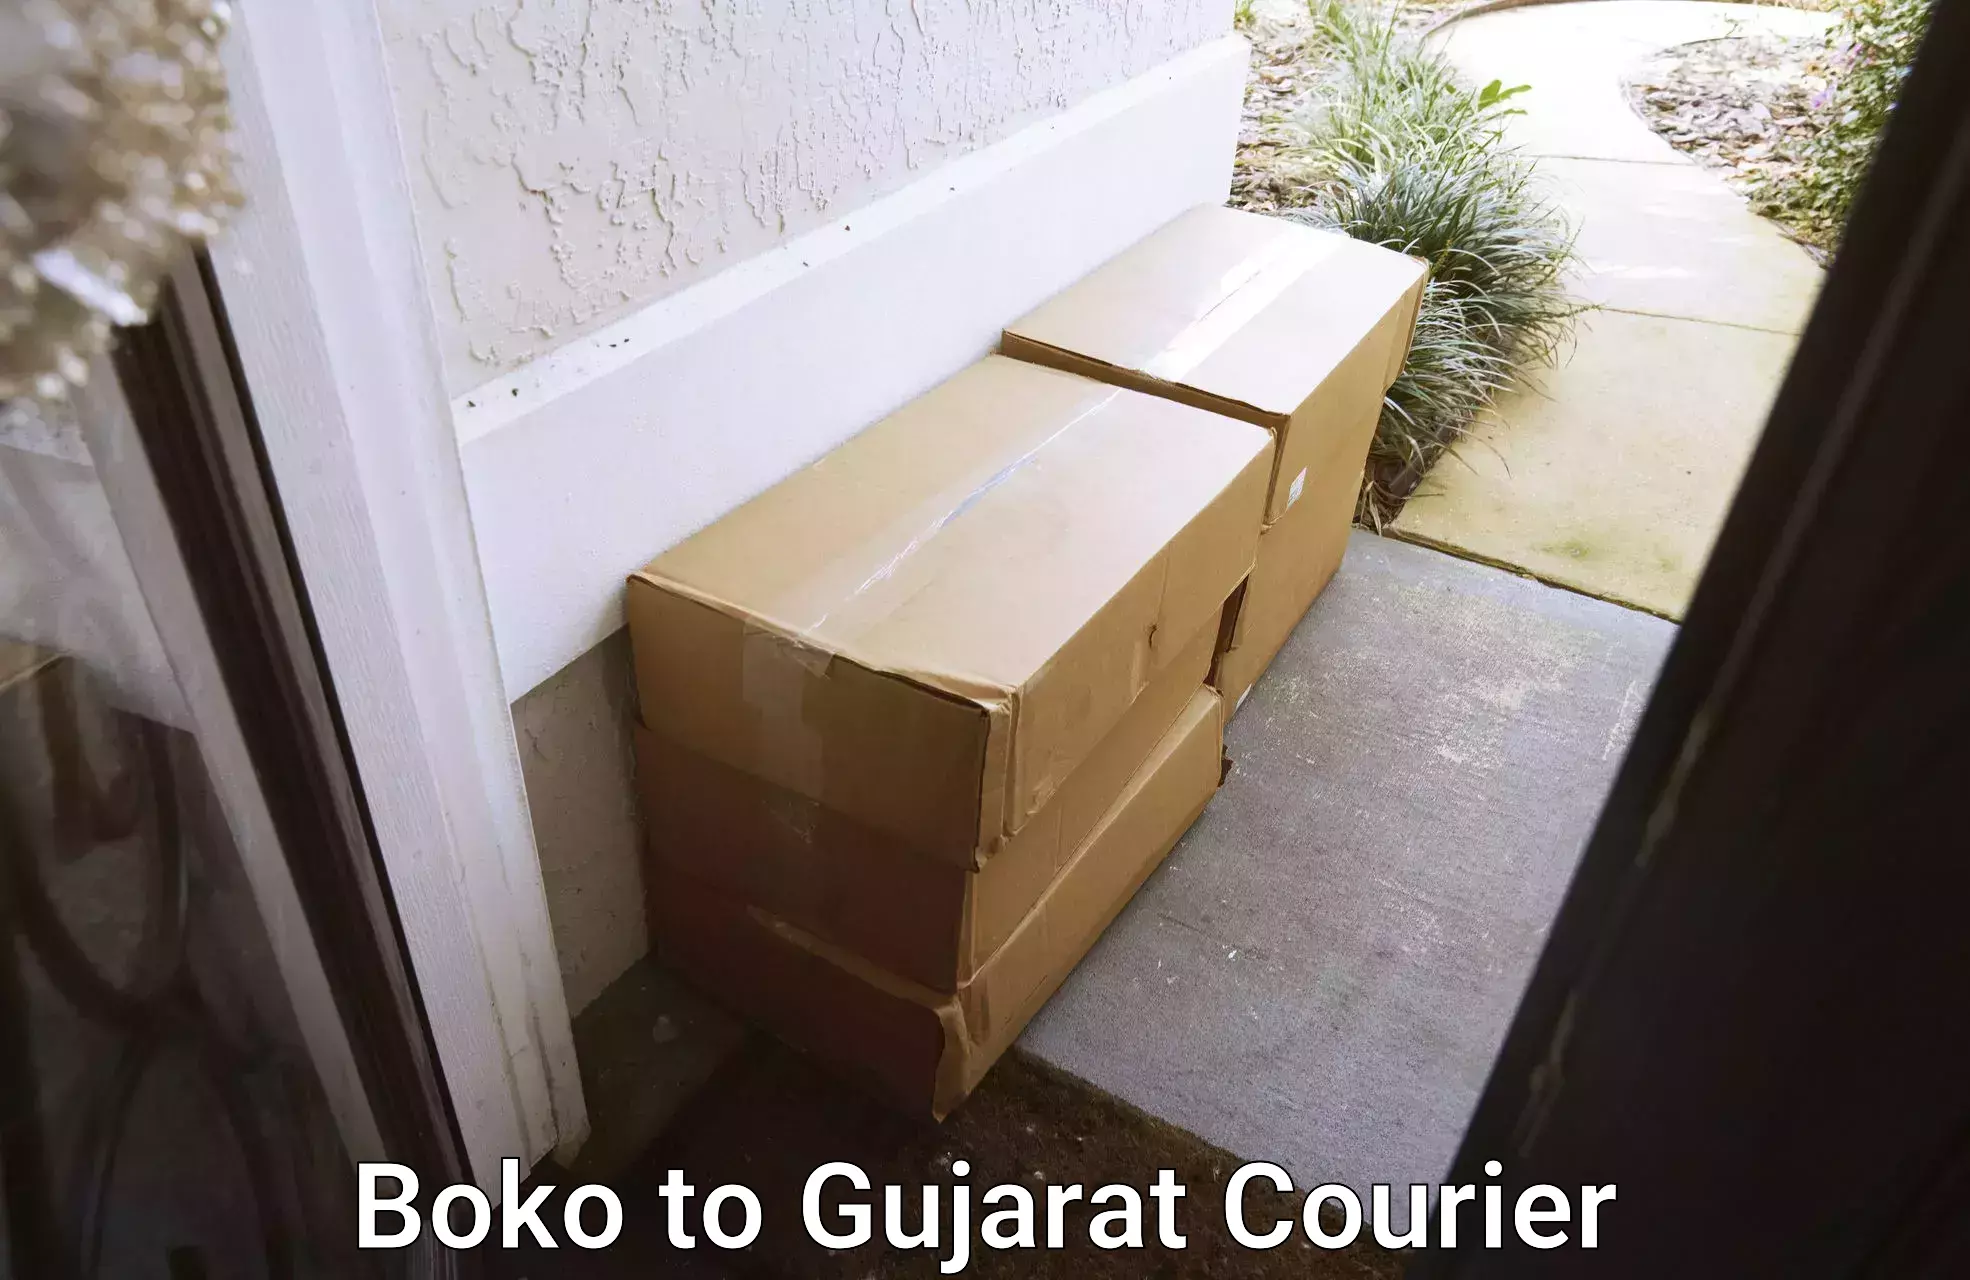 Courier insurance Boko to Matar